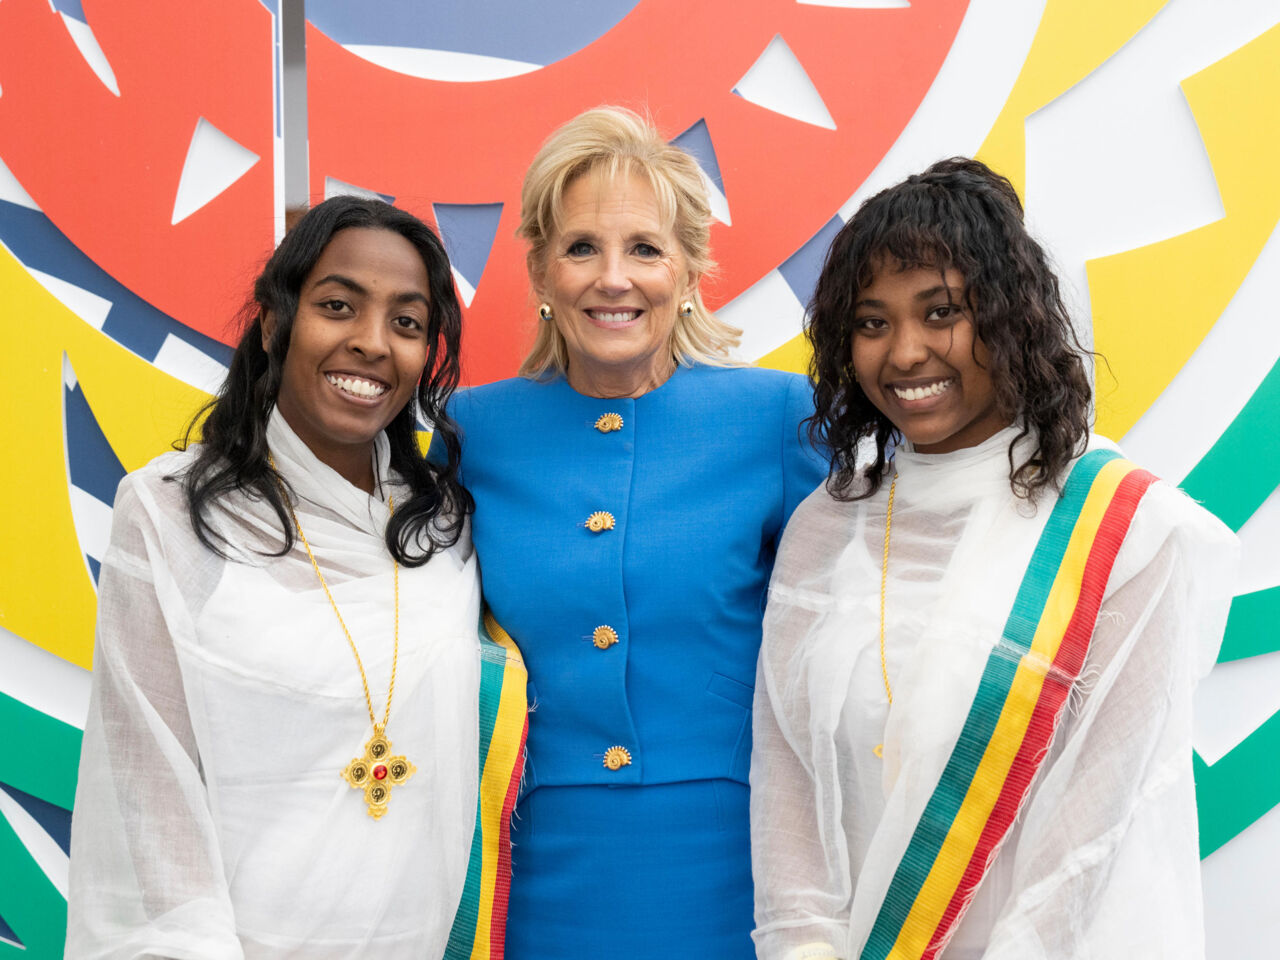 First Lady Jill Biden with Kalkidan Tadesse and Wubit Tadesse from Happy Pads, the winner of BeChangeMaker 2022, at the US Africa Leaders Summit at the Kennedy Center in Washington, DC on 14 December 2022. (Official White House Photo by Erin Scott)
